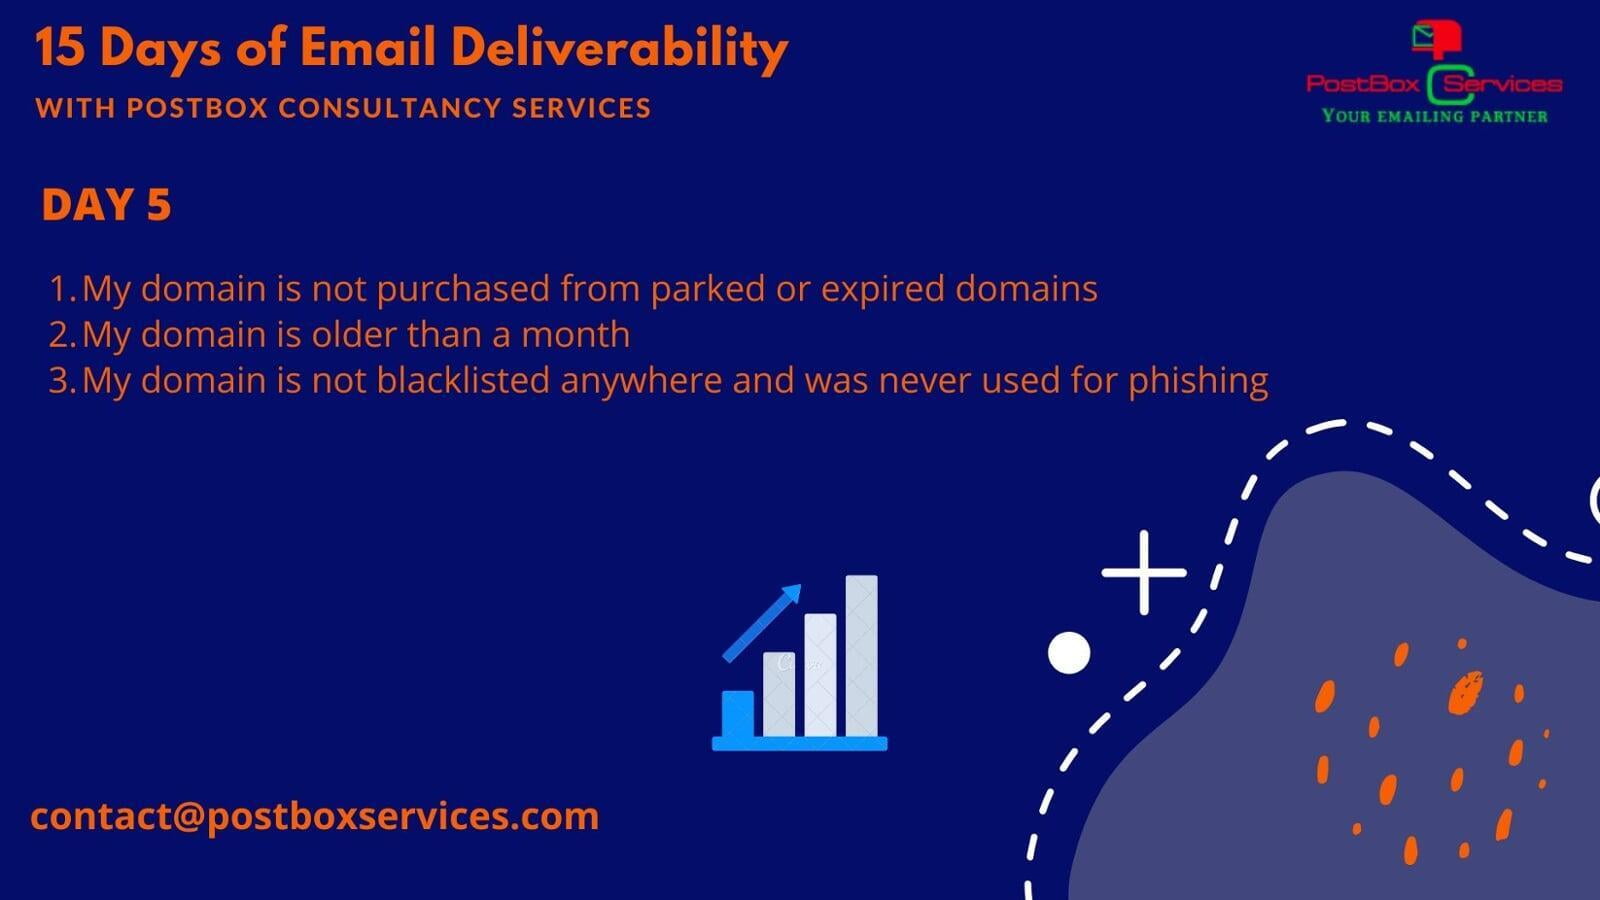 Day 5 Email Deliverability